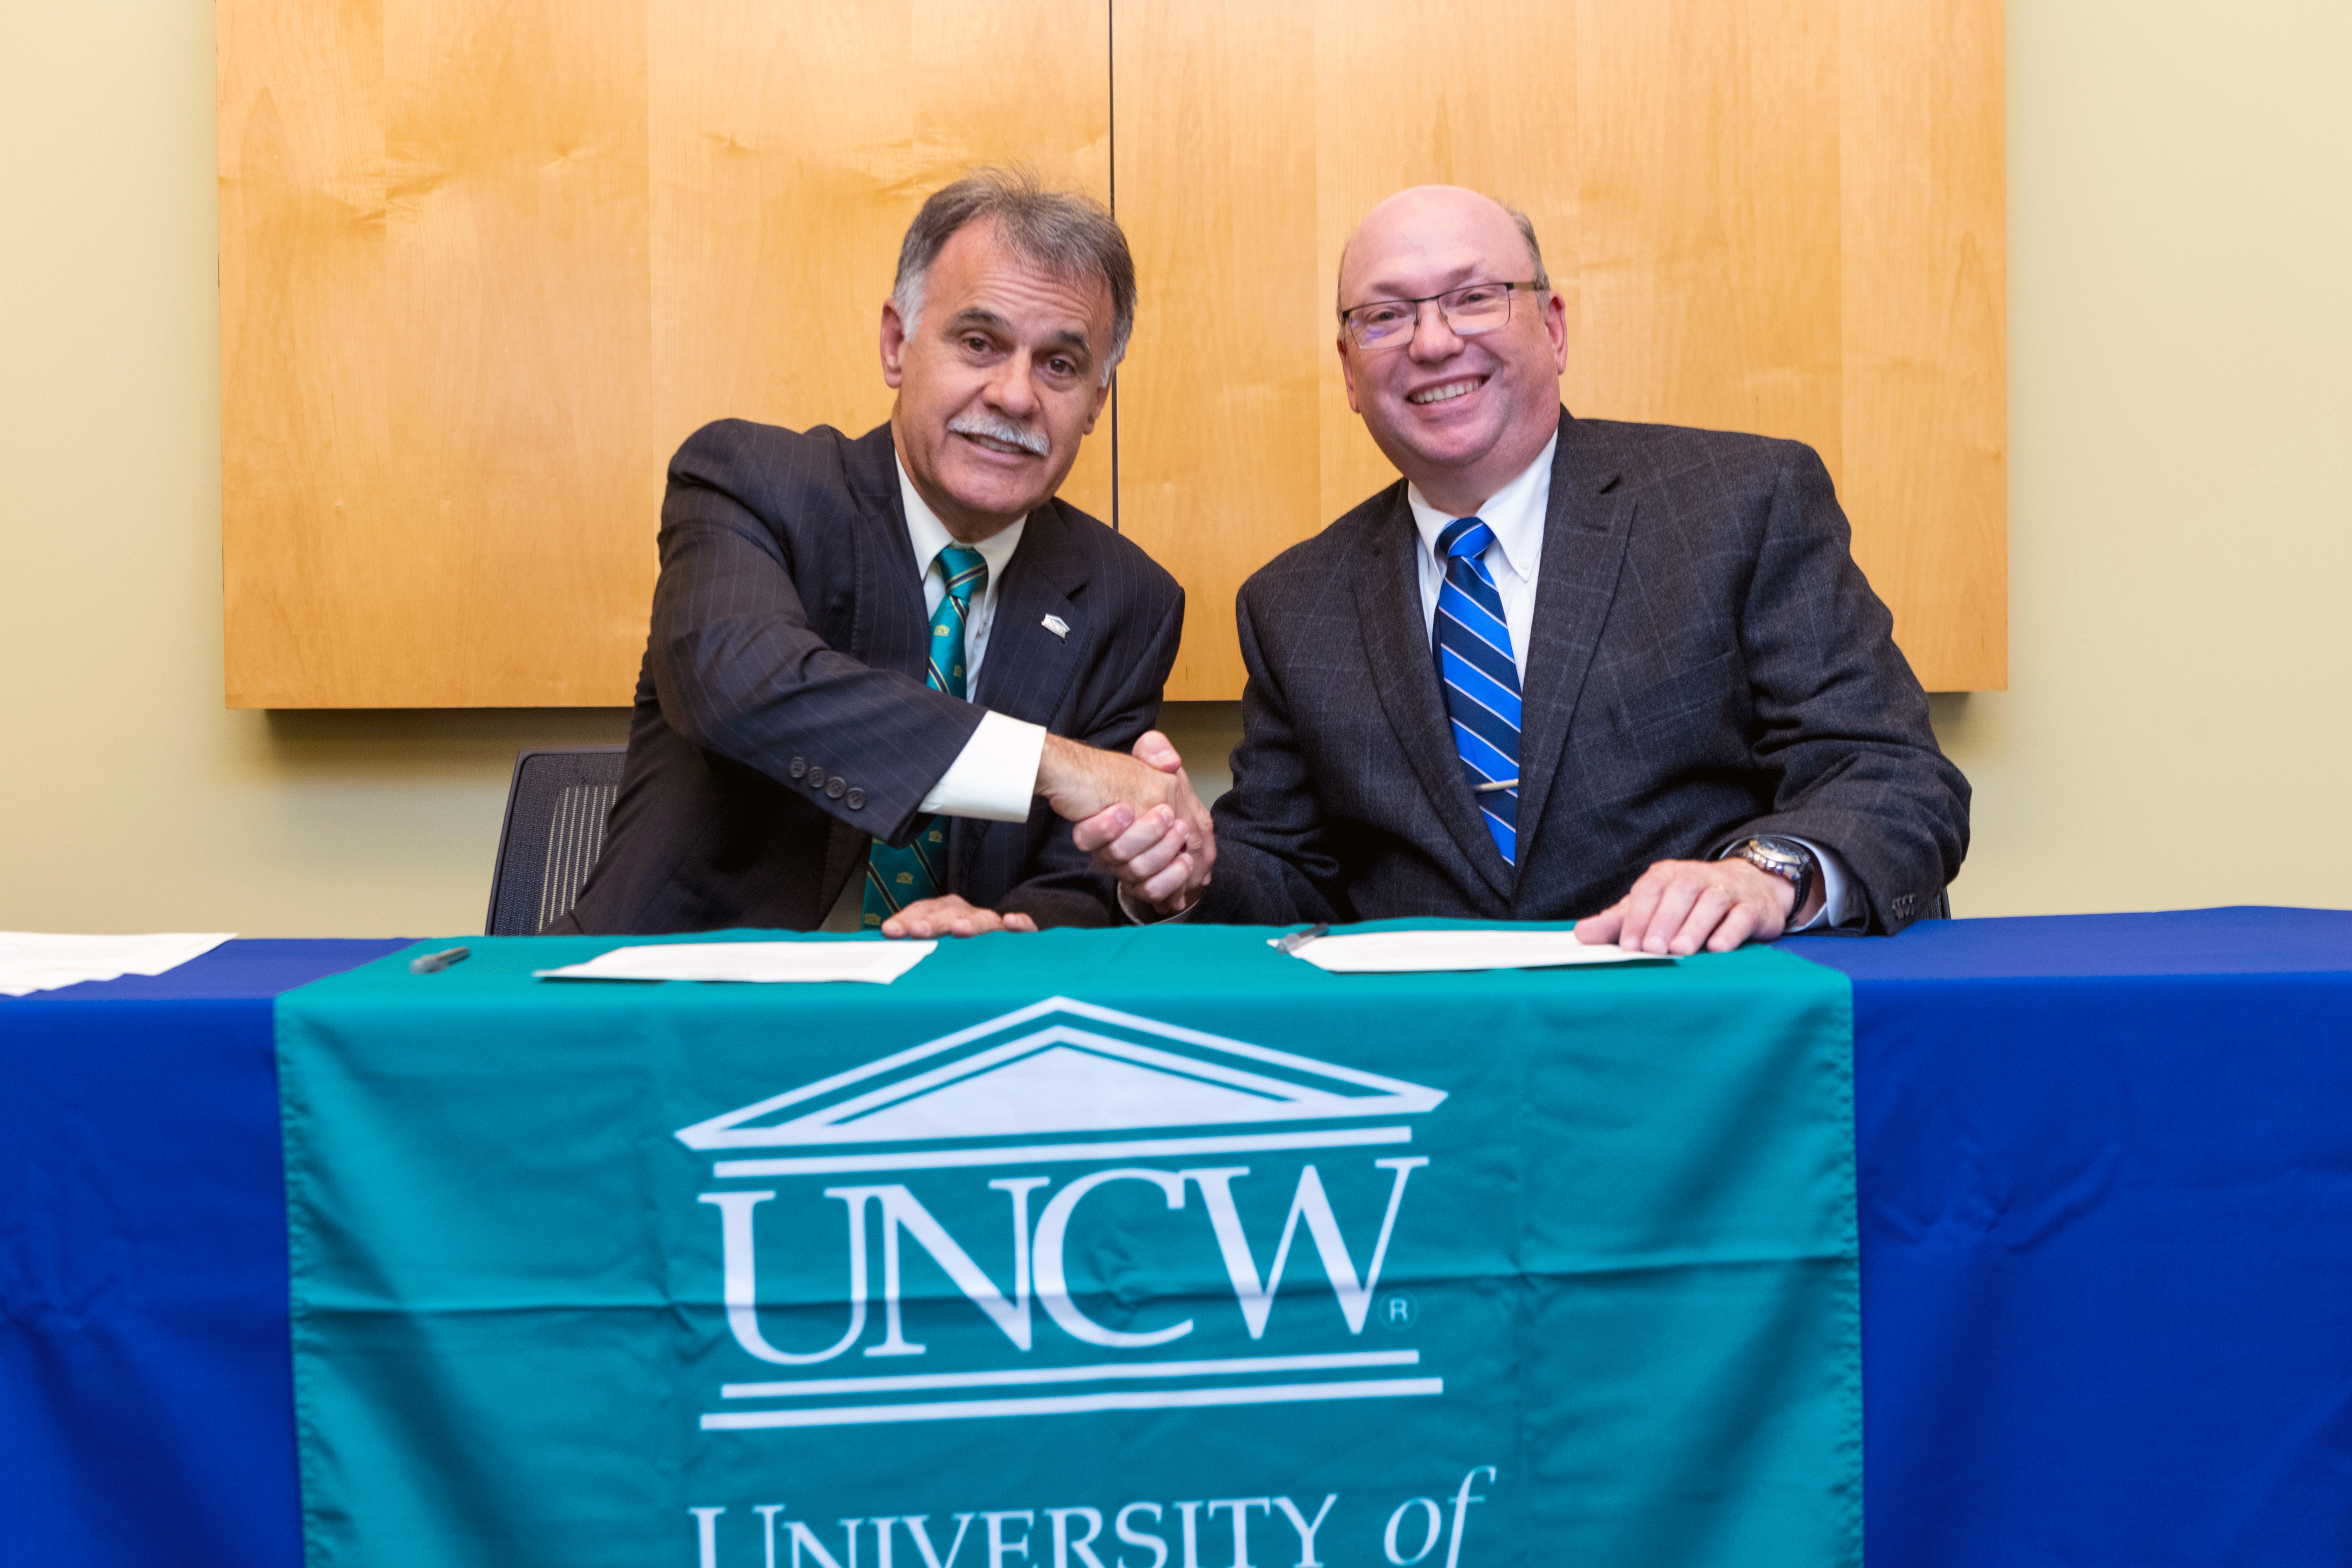 The UNCW Chancellor and the RichmondCC President pose together at a table.